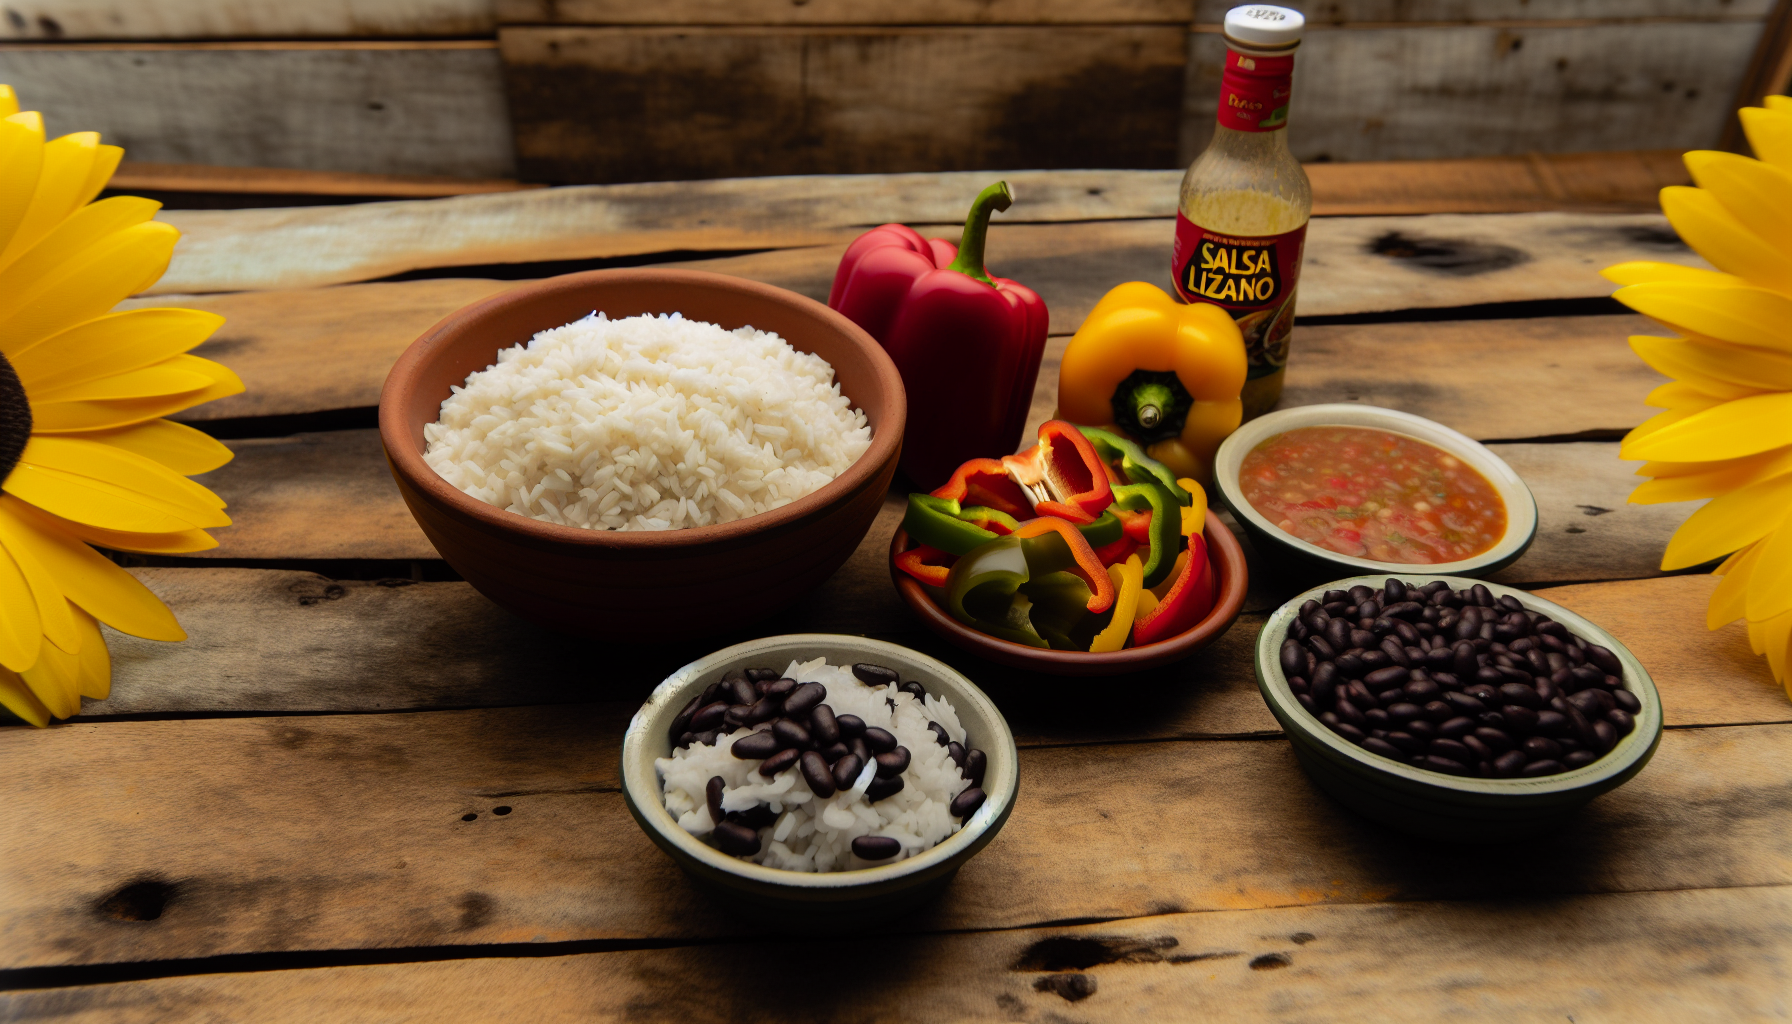 Ingredients for Gallo Pinto spread out on a wooden table